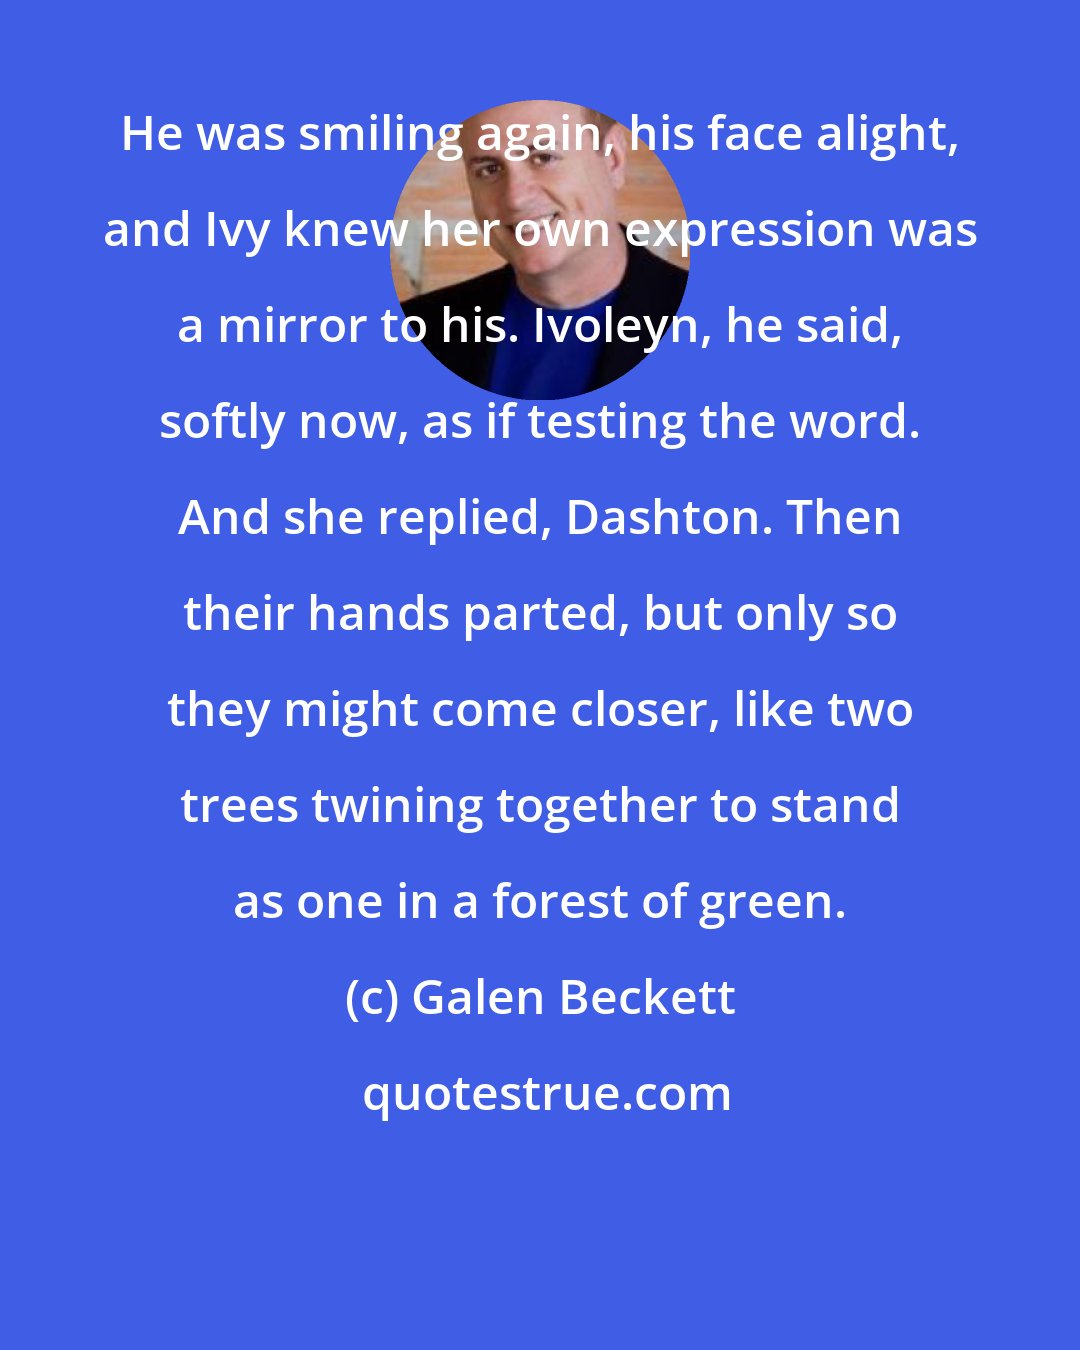 Galen Beckett: He was smiling again, his face alight, and Ivy knew her own expression was a mirror to his. Ivoleyn, he said, softly now, as if testing the word. And she replied, Dashton. Then their hands parted, but only so they might come closer, like two trees twining together to stand as one in a forest of green.